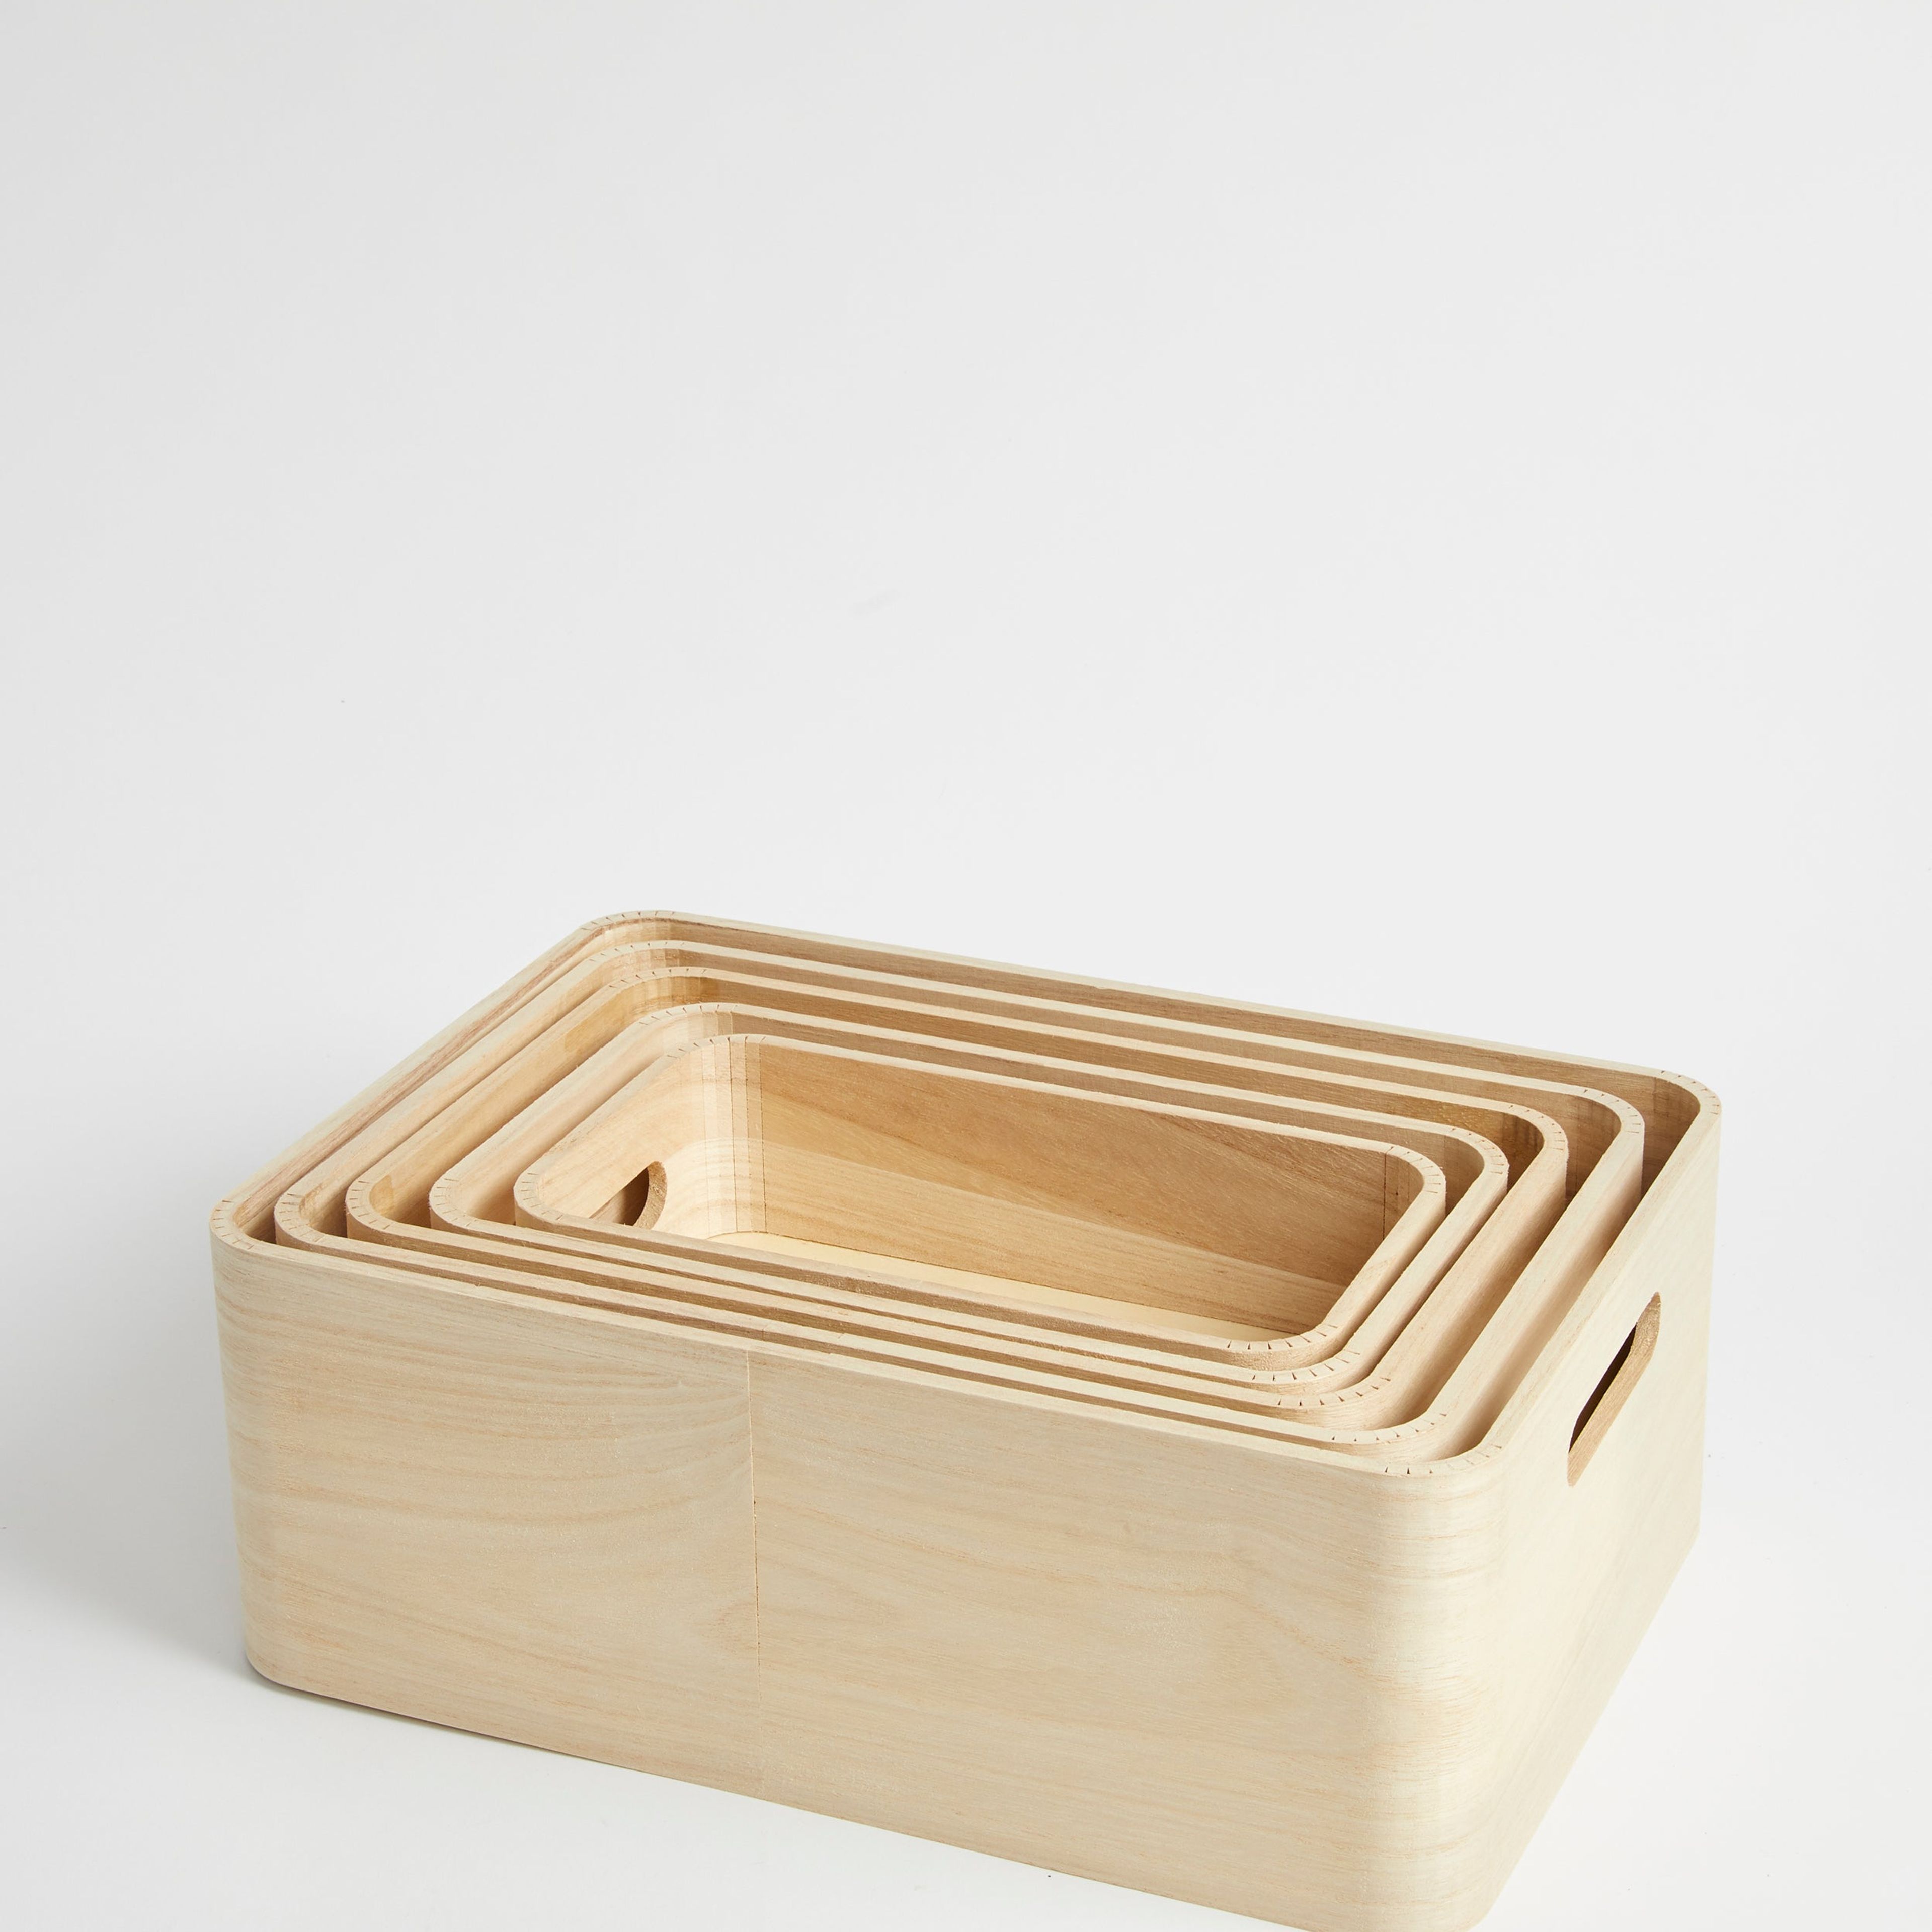 Set of 5 Wooden Stacking Storage Boxes